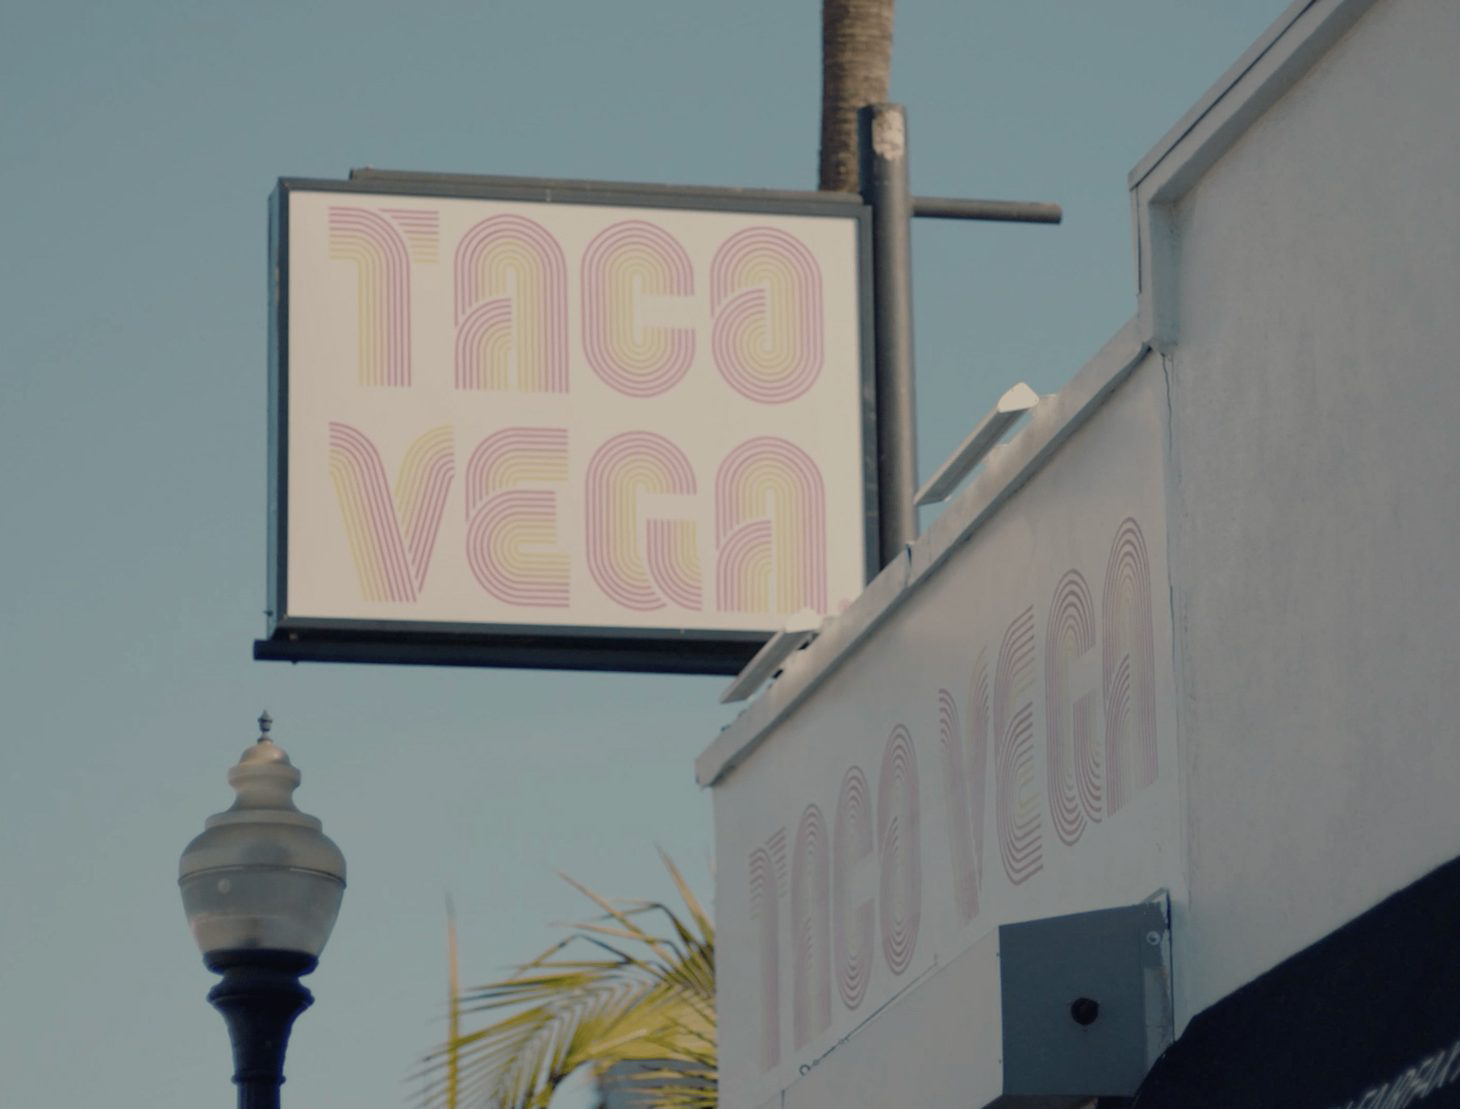 The outdoor sign of Taco Vega.